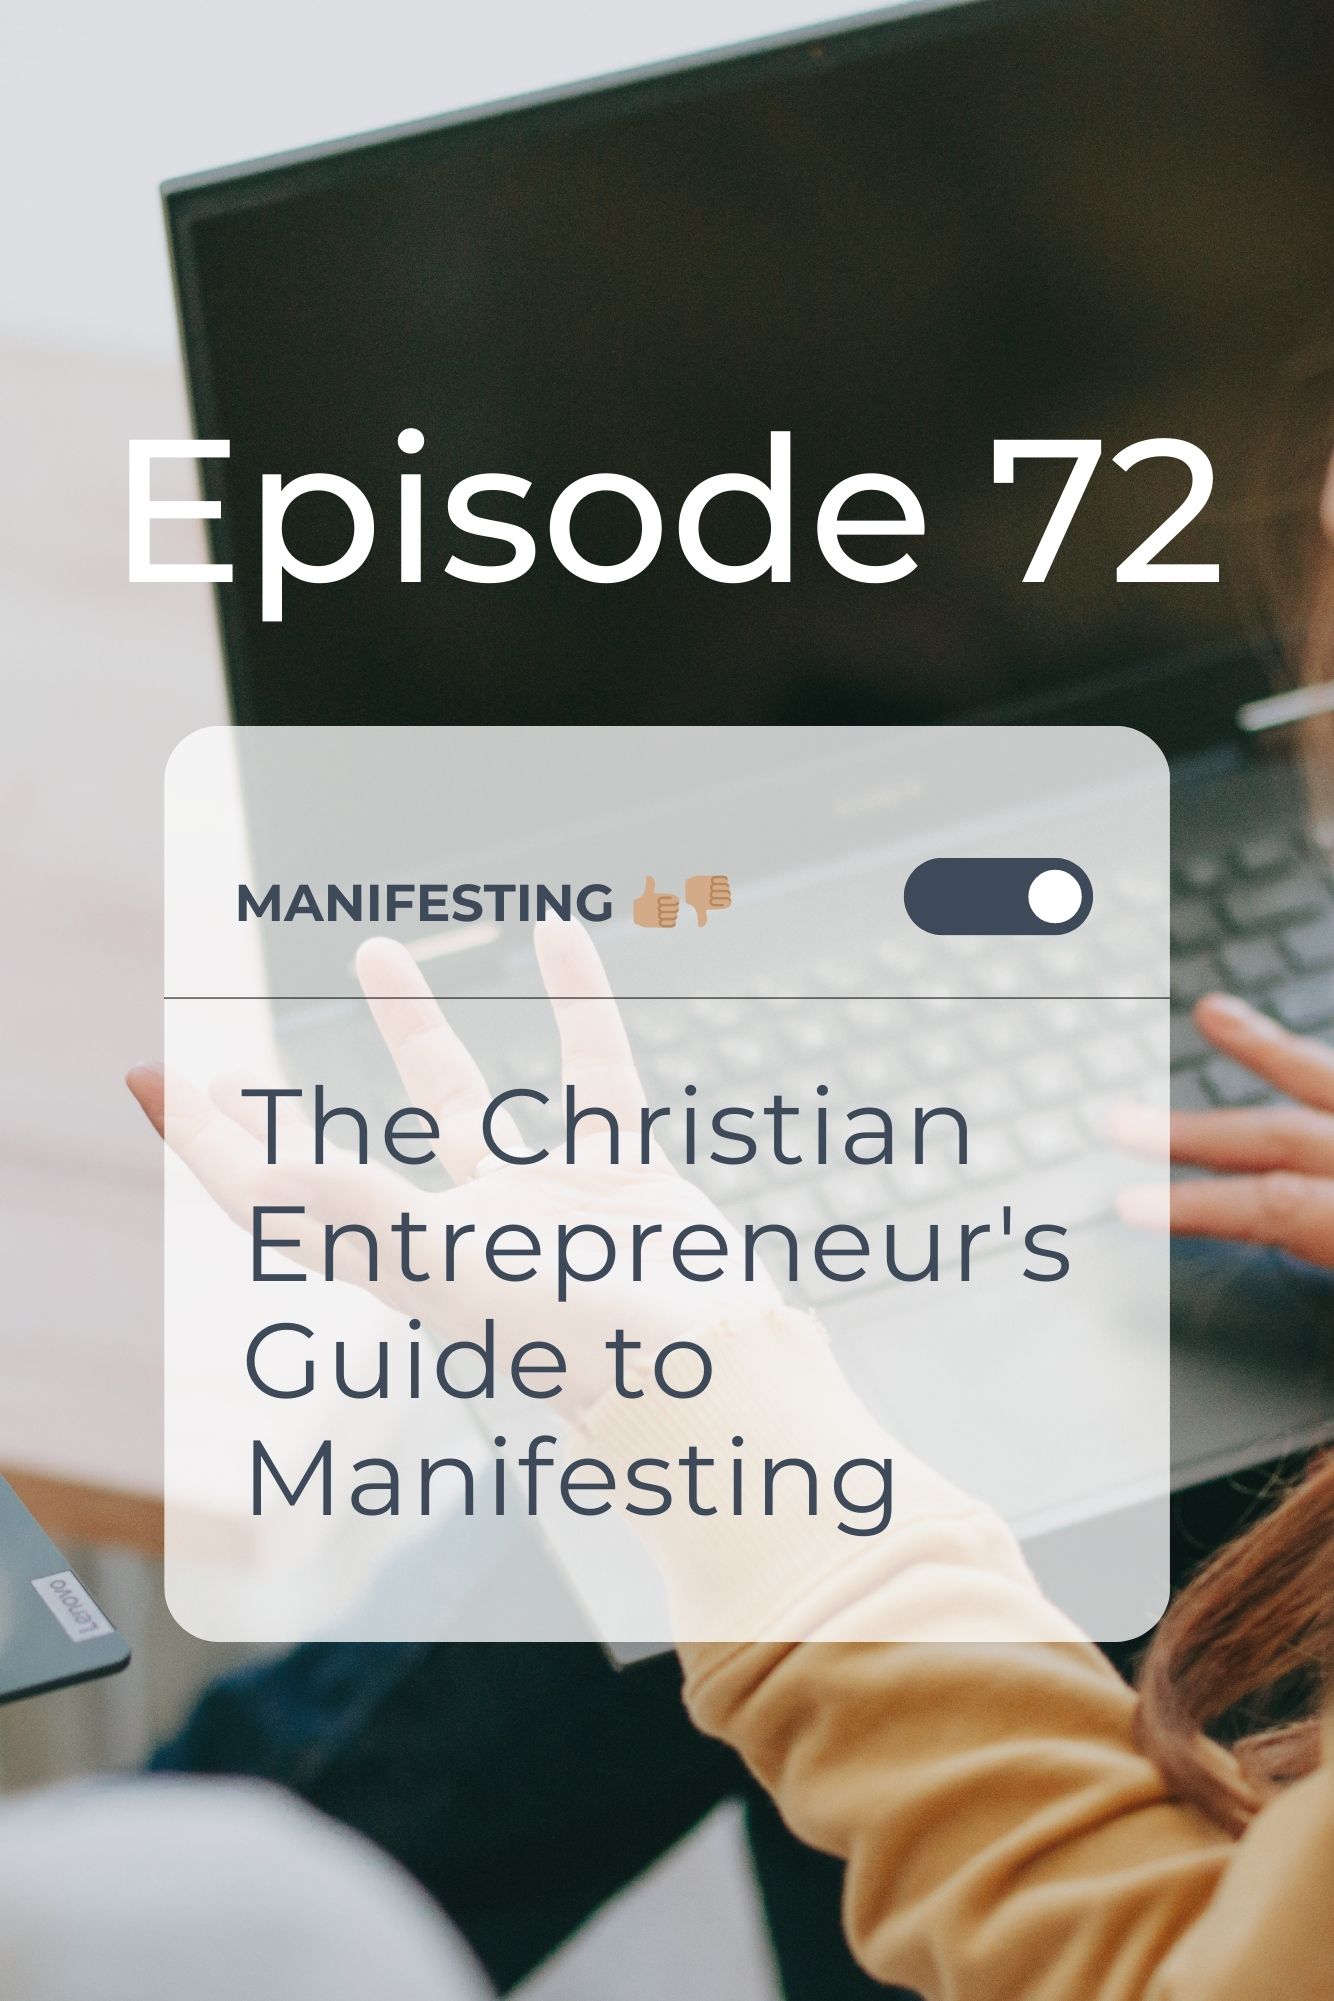 A cover photo for a podcast by Christian women in business about manifesting and how that fits into your life and business as a Christian entrepreneur.